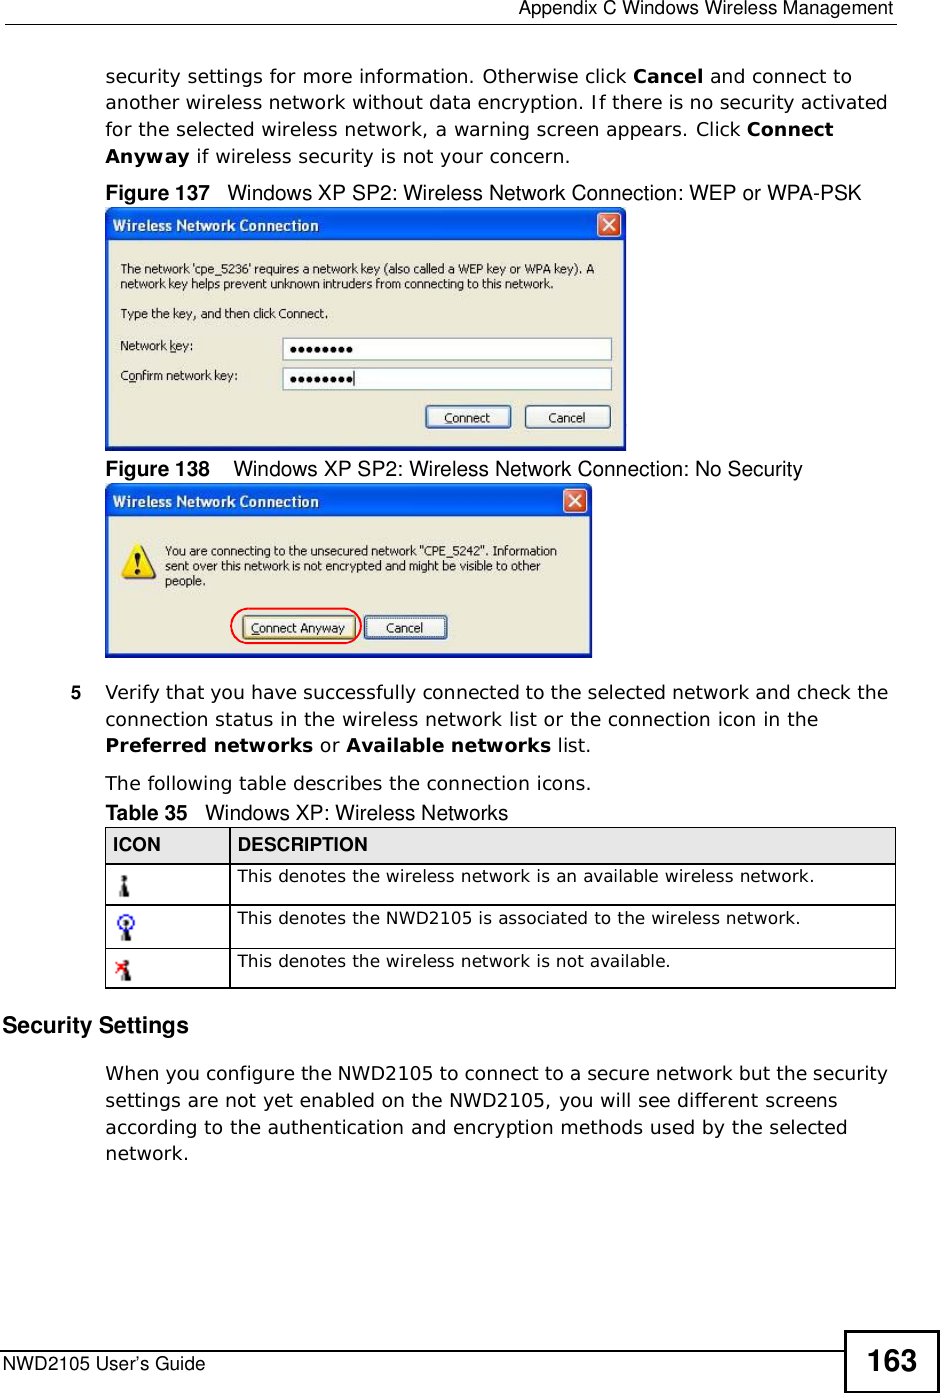  Appendix CWindows Wireless ManagementNWD2105 User’s Guide 163security settings for more information. Otherwise click Cancel and connect to another wireless network without data encryption. If there is no security activated for the selected wireless network, a warning screen appears. Click Connect Anyway if wireless security is not your concern.Figure 137   Windows XP SP2: Wireless Network Connection: WEP or WPA-PSKFigure 138    Windows XP SP2: Wireless Network Connection: No Security5Verify that you have successfully connected to the selected network and check the connection status in the wireless network list or the connection icon in the Preferred networks or Available networks list.The following table describes the connection icons.Security SettingsWhen you configure the NWD2105 to connect to a secure network but the security settings are not yet enabled on the NWD2105, you will see different screens according to the authentication and encryption methods used by the selected network.Table 35   Windows XP: Wireless NetworksICON DESCRIPTIONThis denotes the wireless network is an available wireless network.This denotes the NWD2105 is associated to the wireless network.This denotes the wireless network is not available.